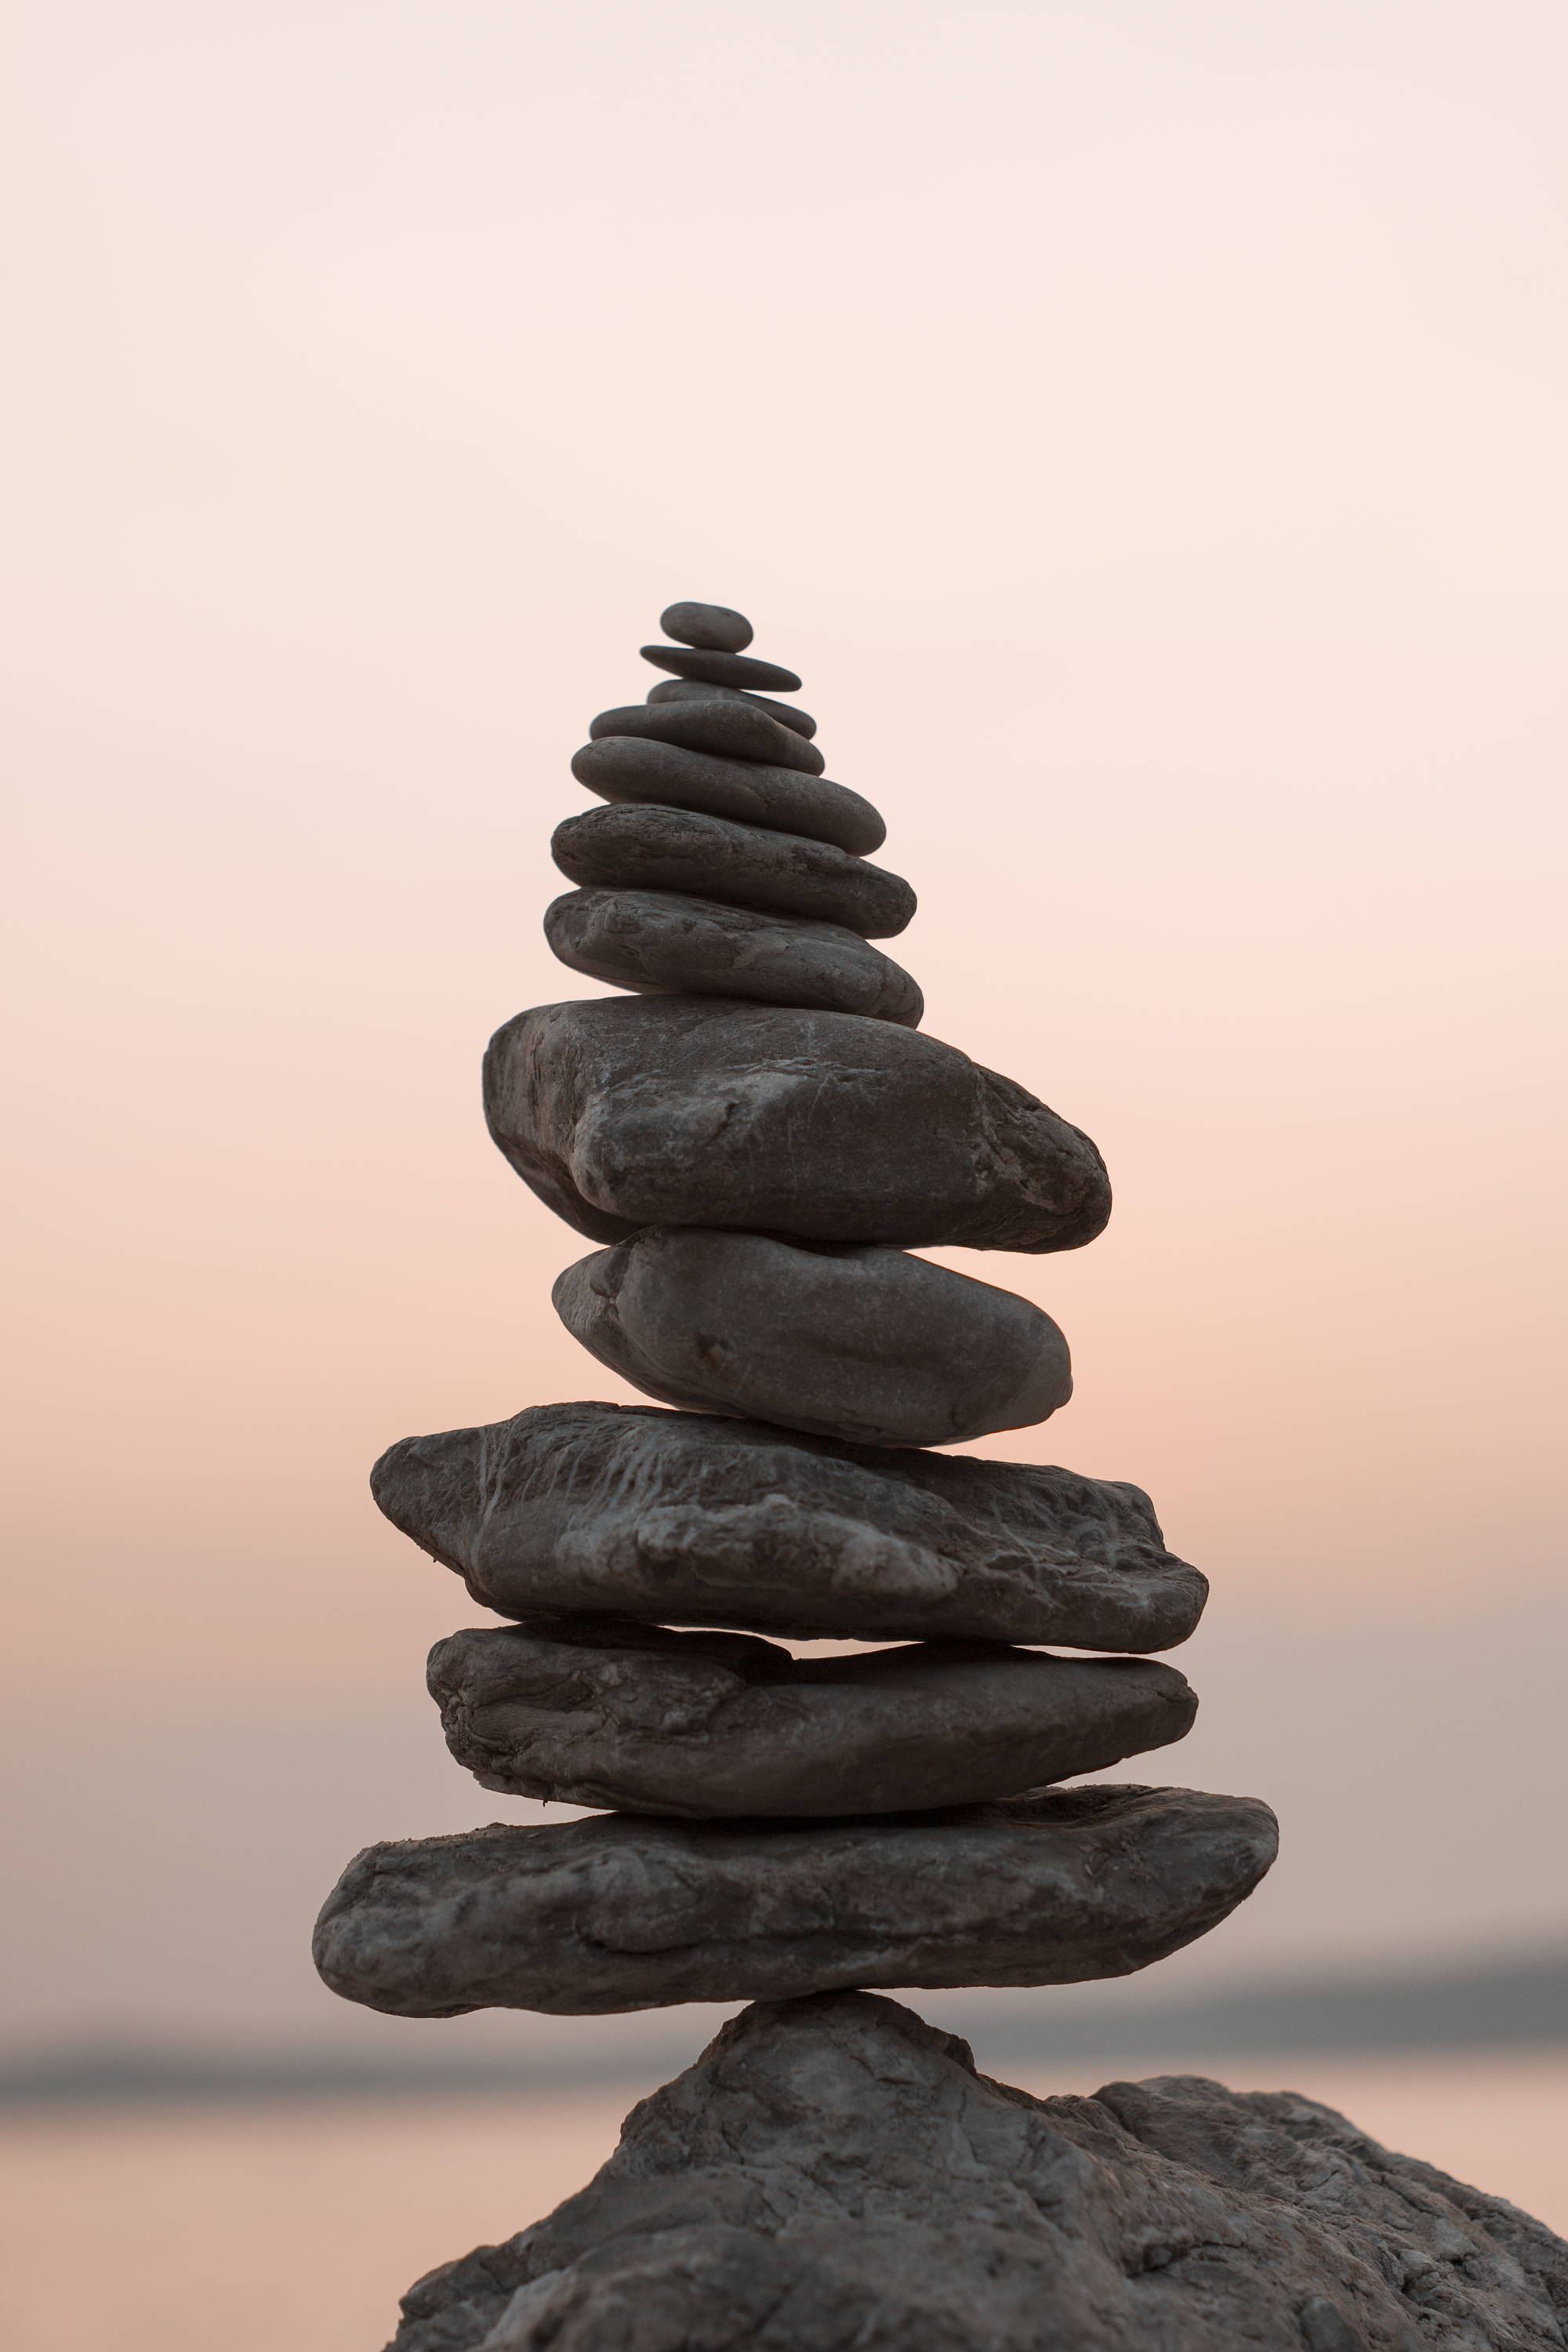 rocks stacked representing mindfulness